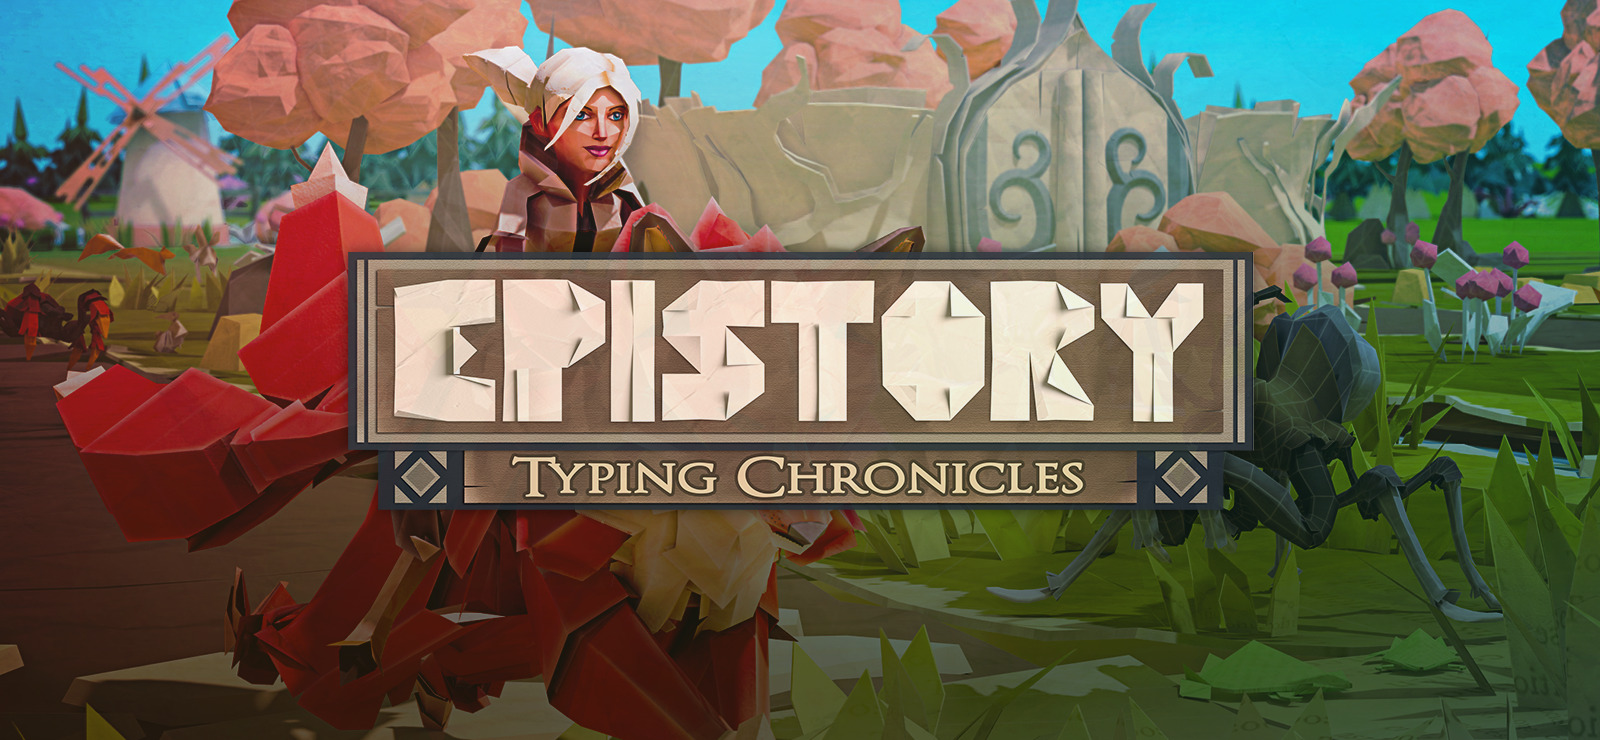 Epistory 1 0 3 – an atmospheric action adventure game downloads